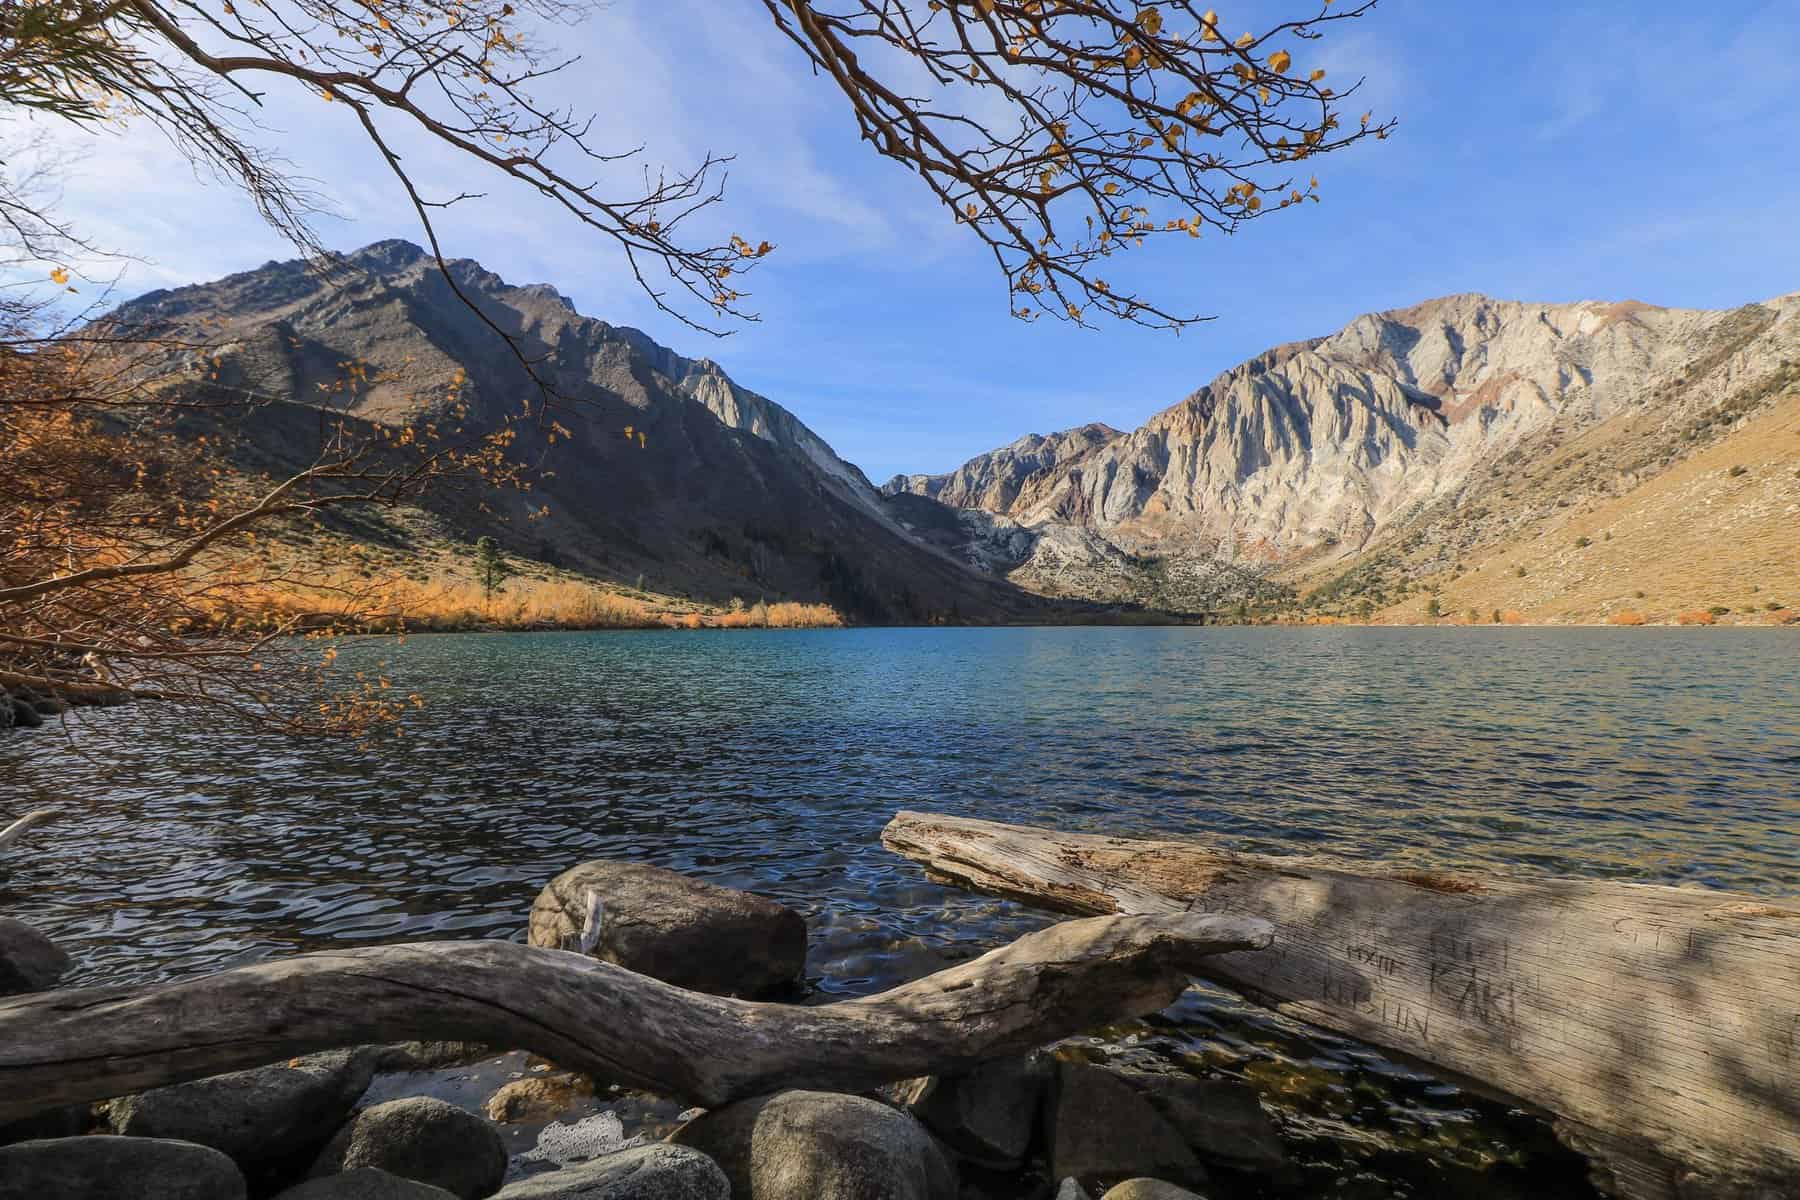 Convict Lake is one of the lakes near Mammoth Lakes